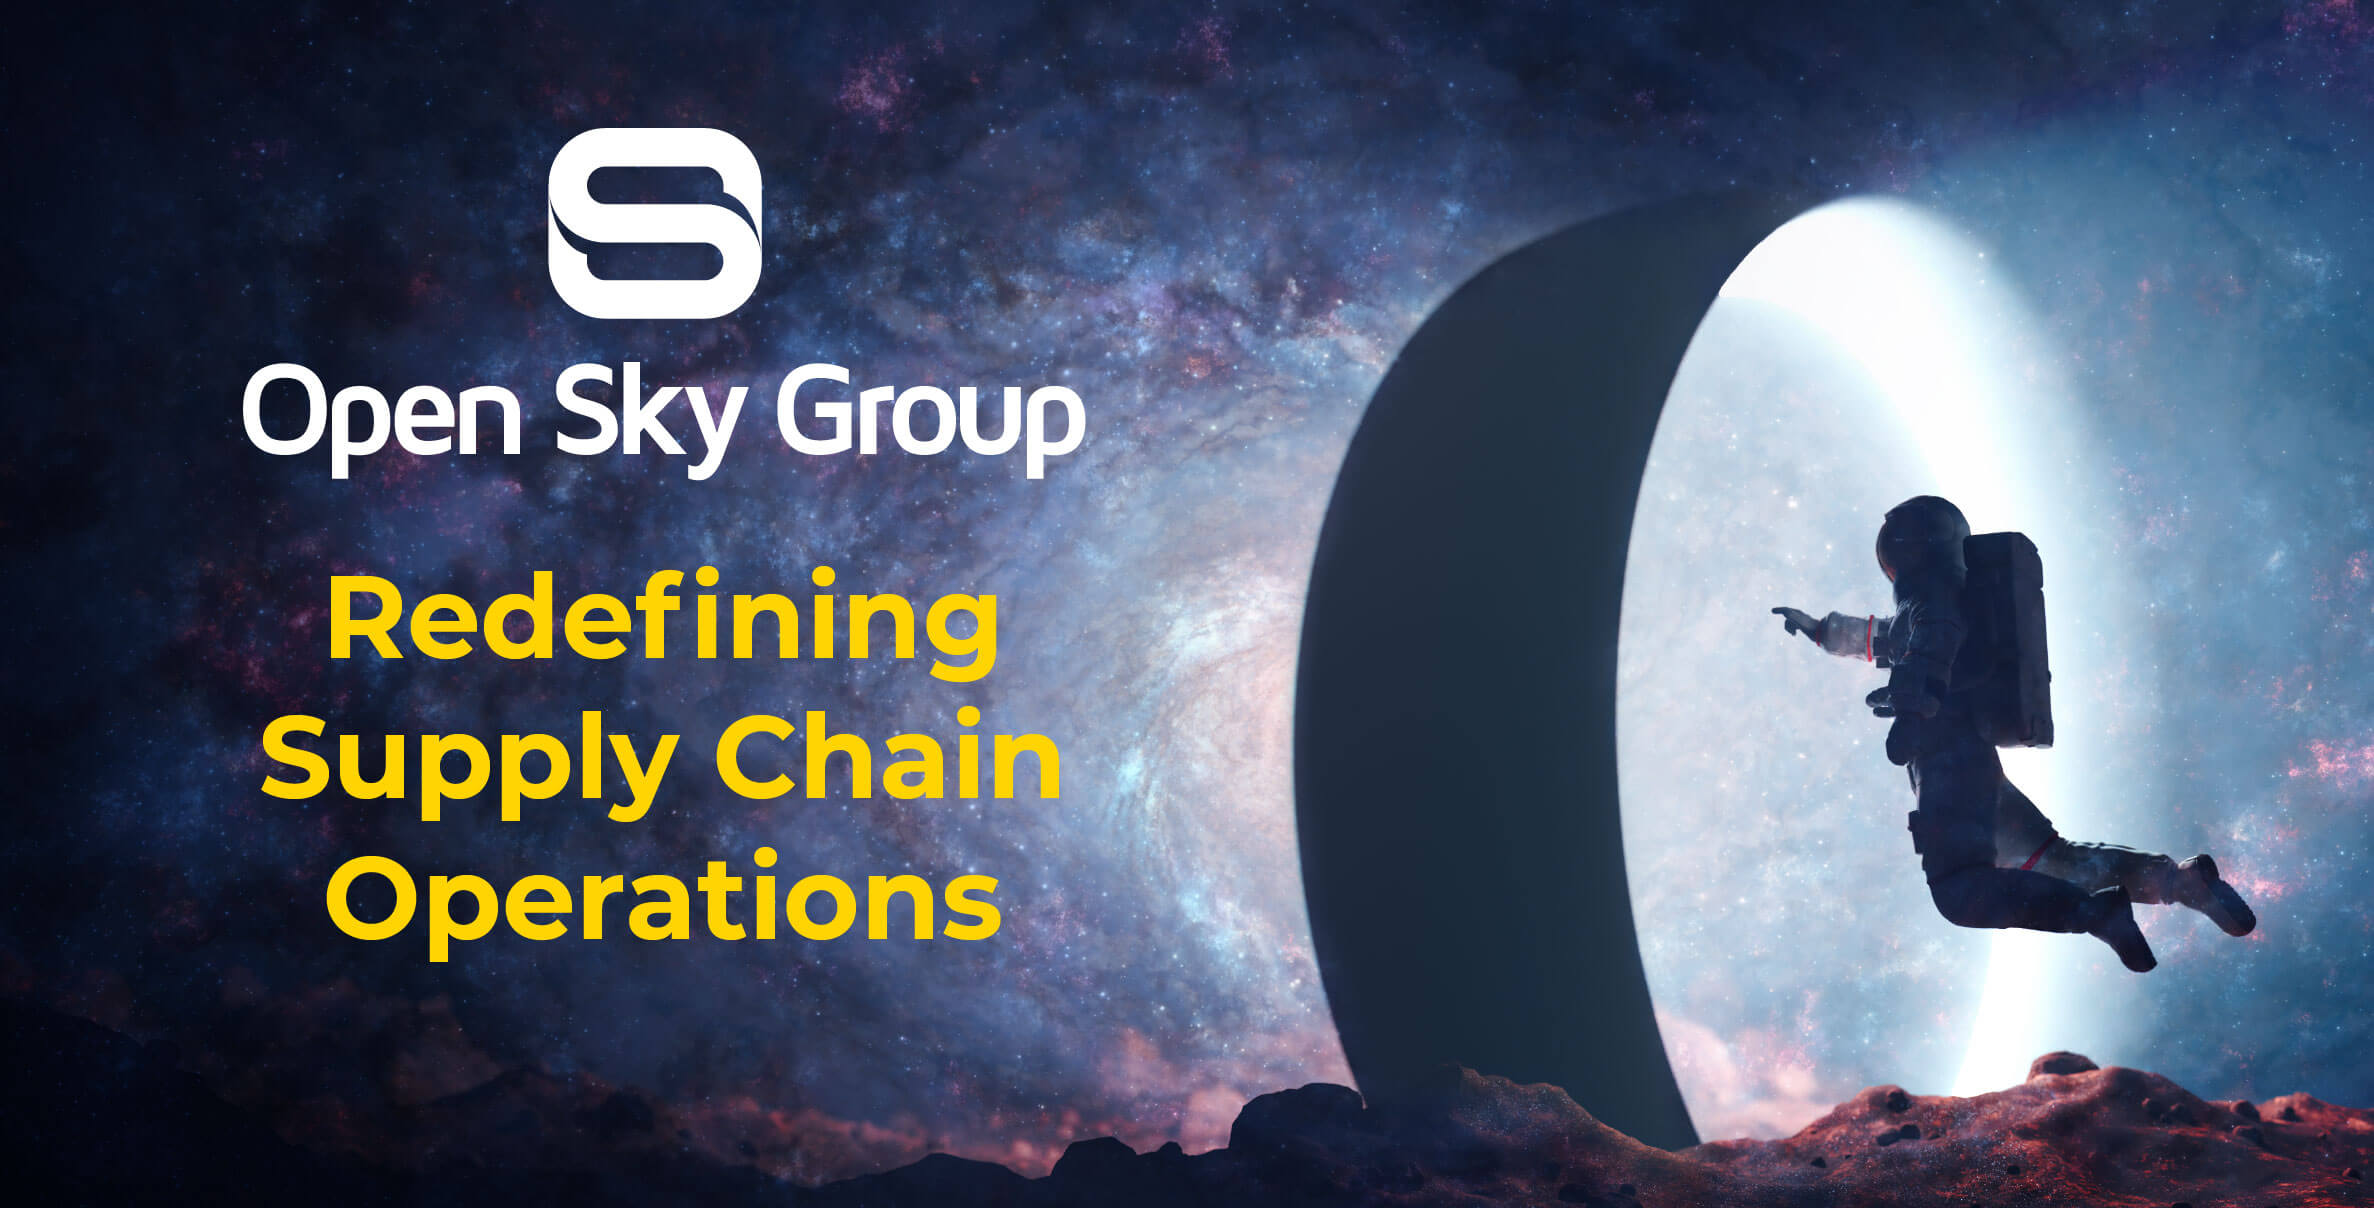 Open Sky Group Overview